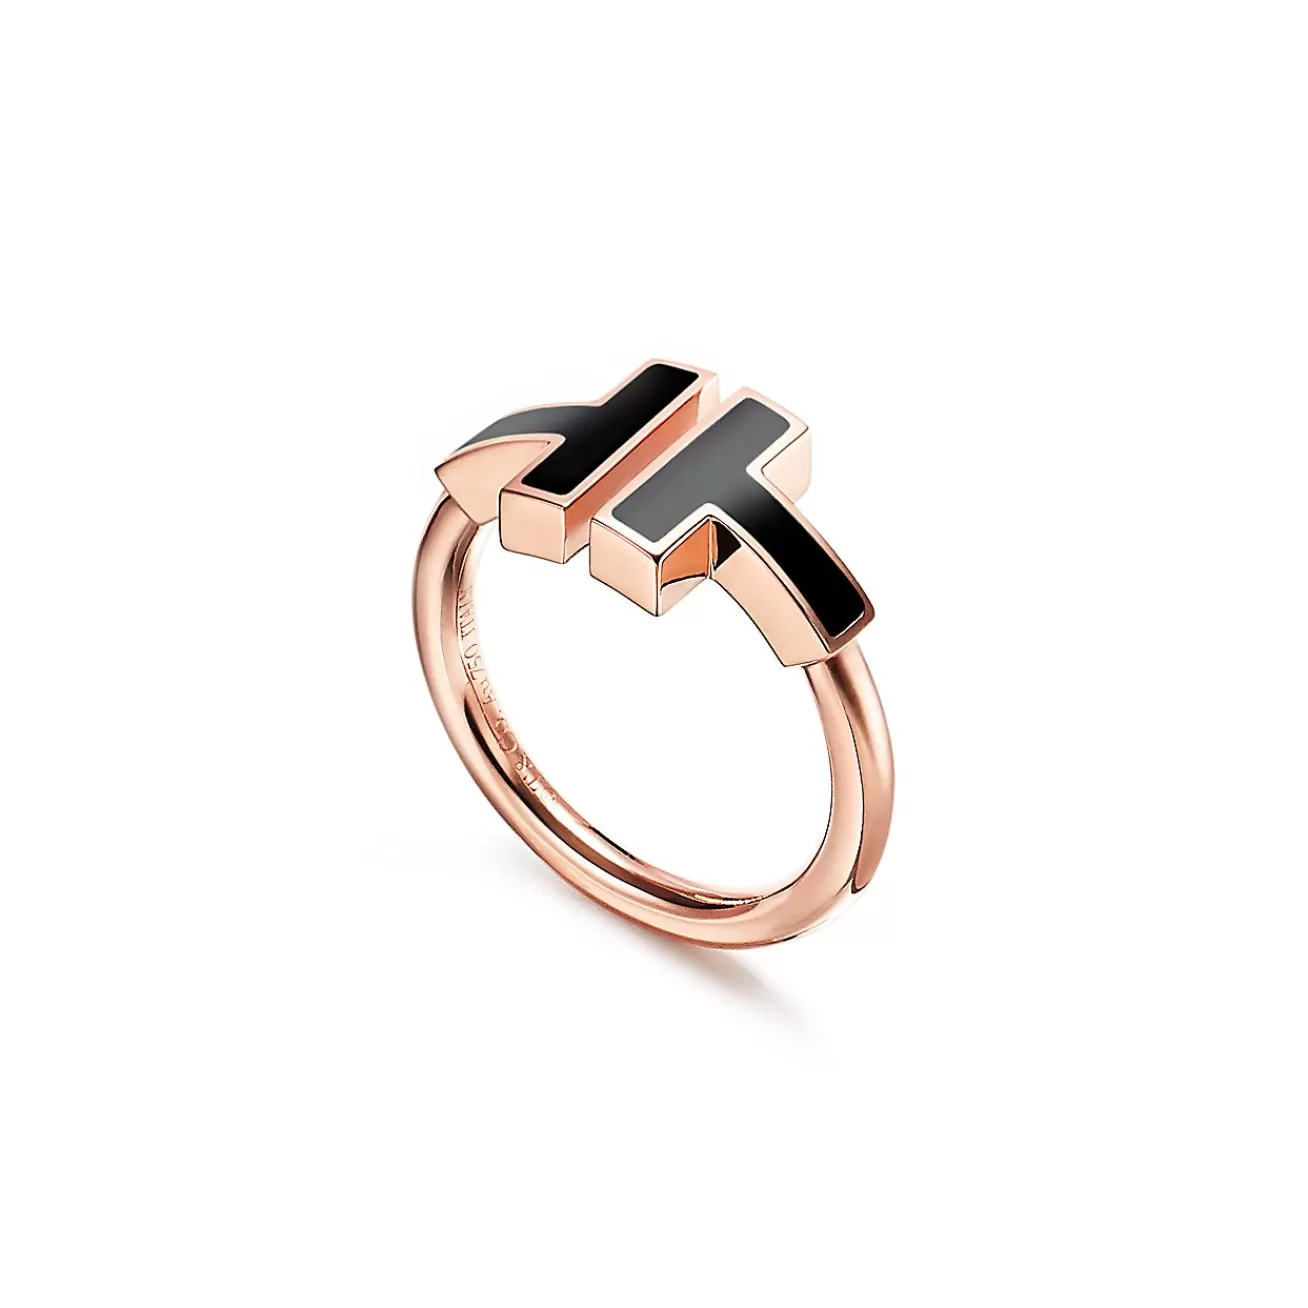 Tiffany & Co. Tiffany T black onyx wire ring in 18k rose gold. | ^ Rings | Rose Gold Jewelry